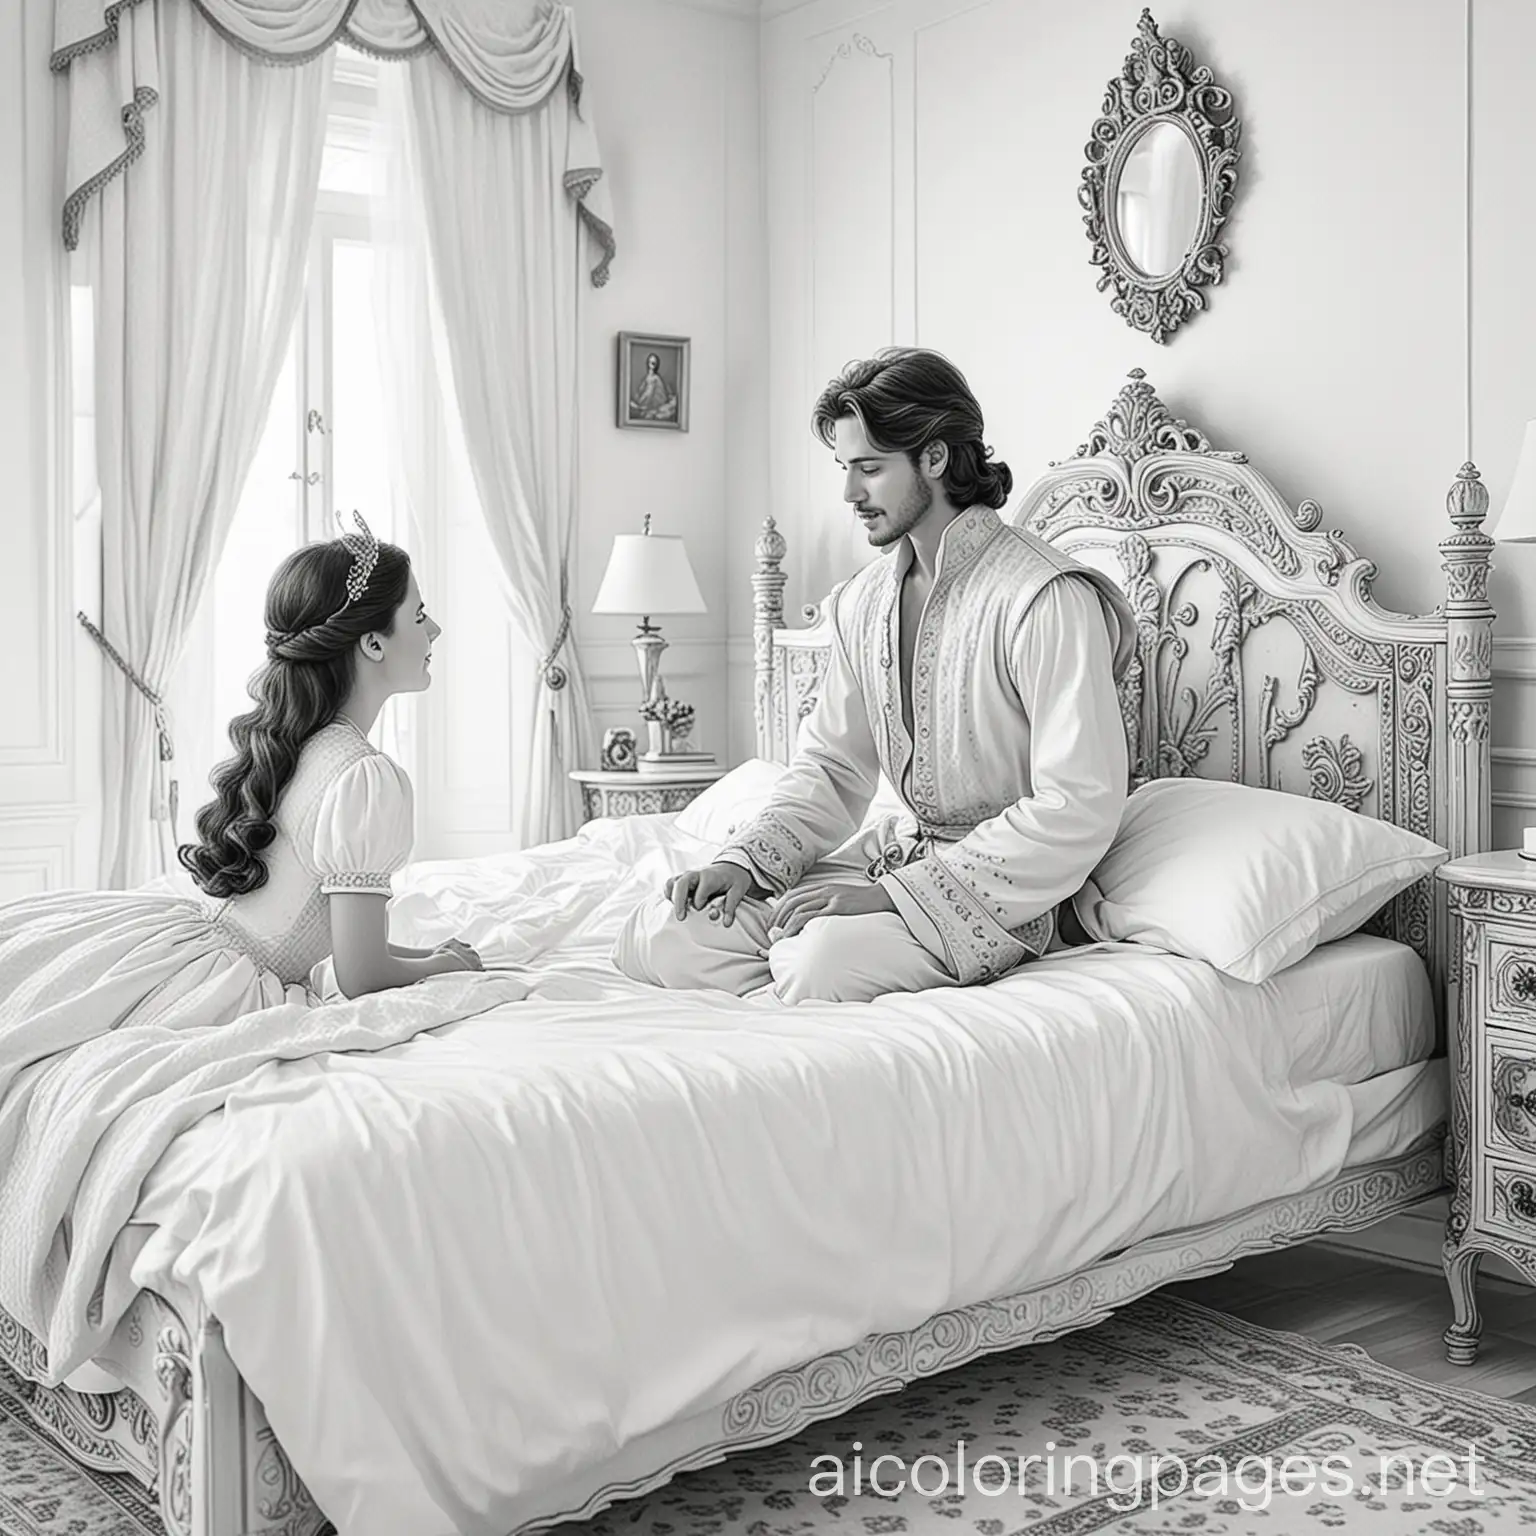 young prince talking to princess in her bed room., Coloring Page, black and white, line art, white background, Simplicity, Ample White Space.